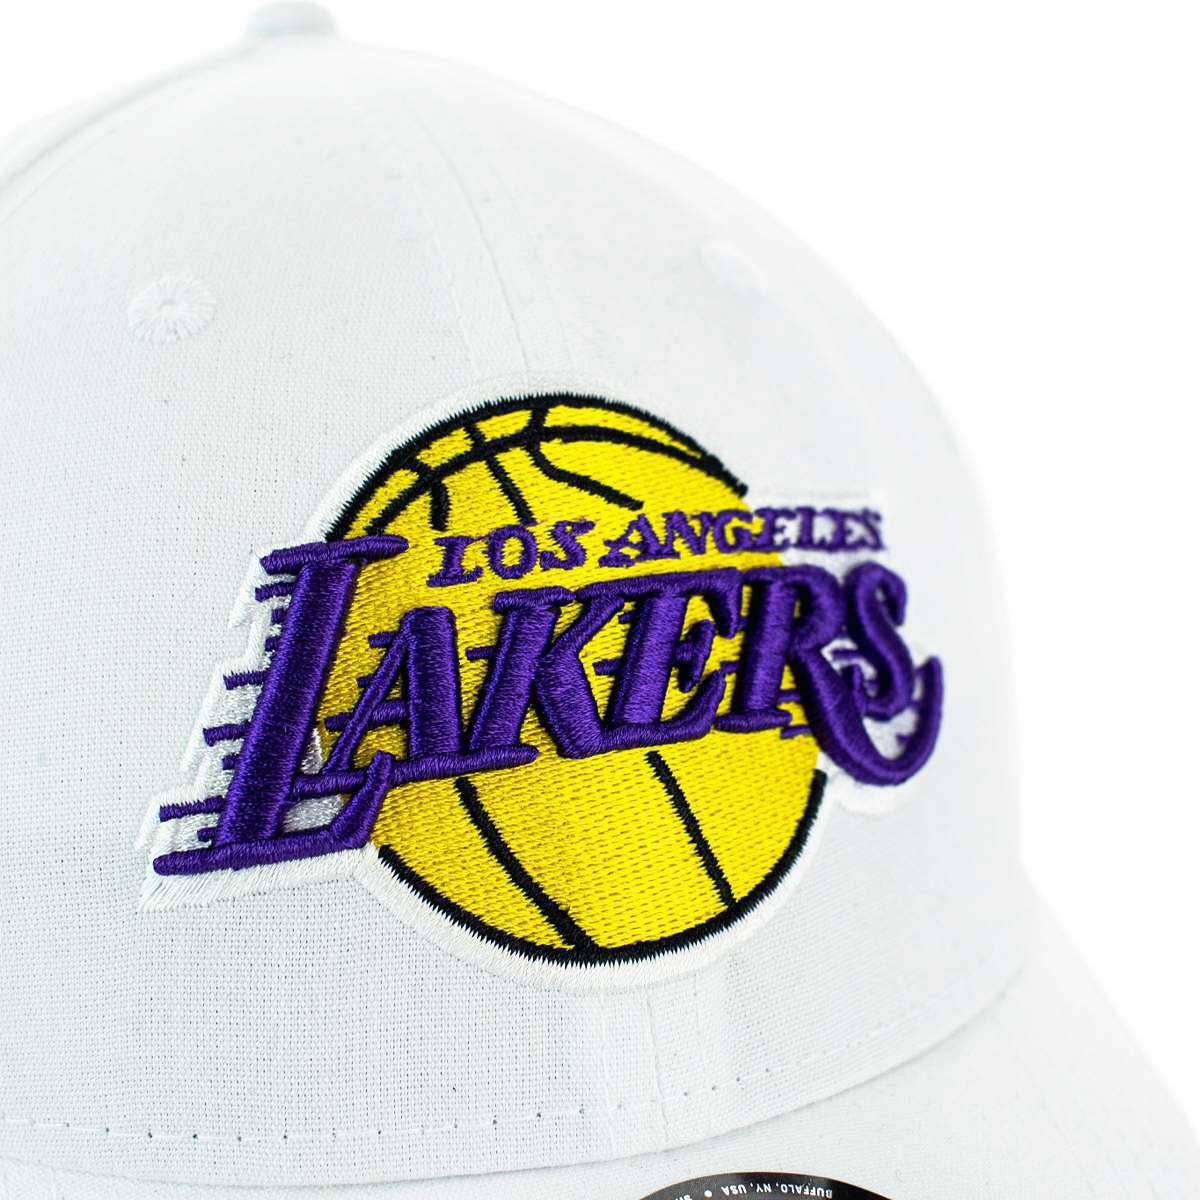 NEW ERA HOME FIELD 9FORTY LOS ANGELES LAKERS TRUCKER CAP